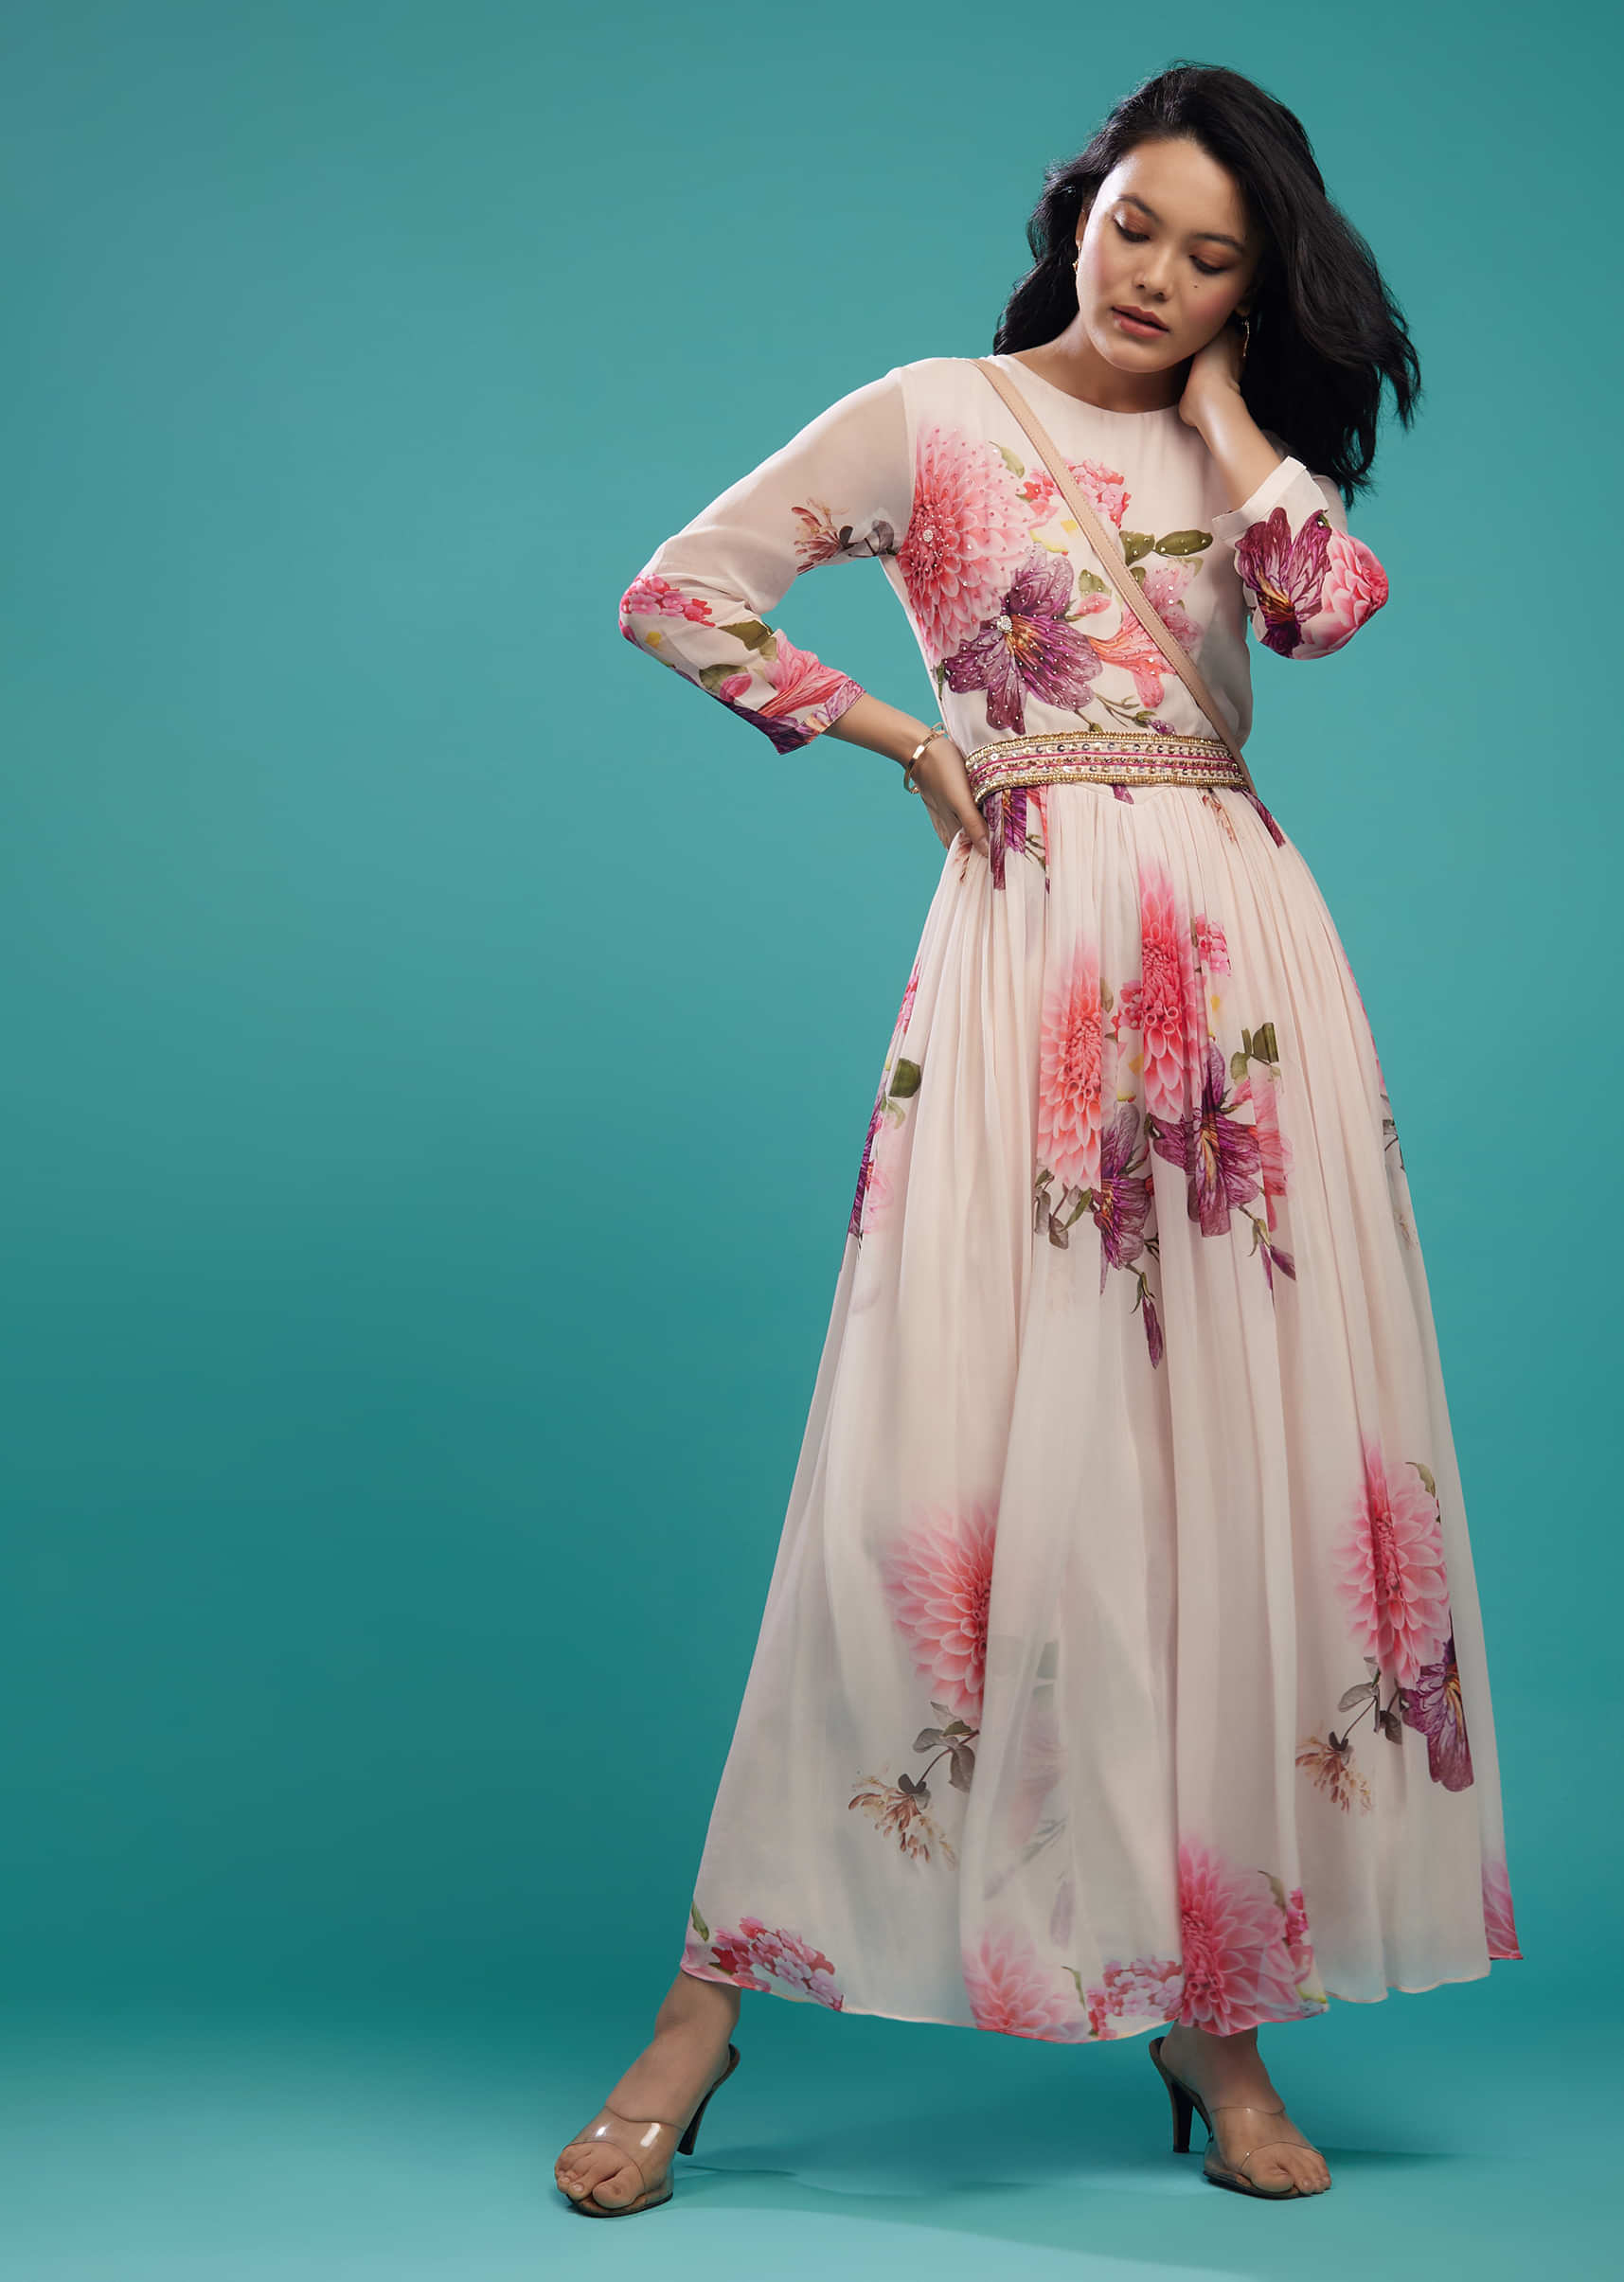 Candy Pink Pleated Jumpsuit In Floral Print And Hand Embroidered Waist Belt